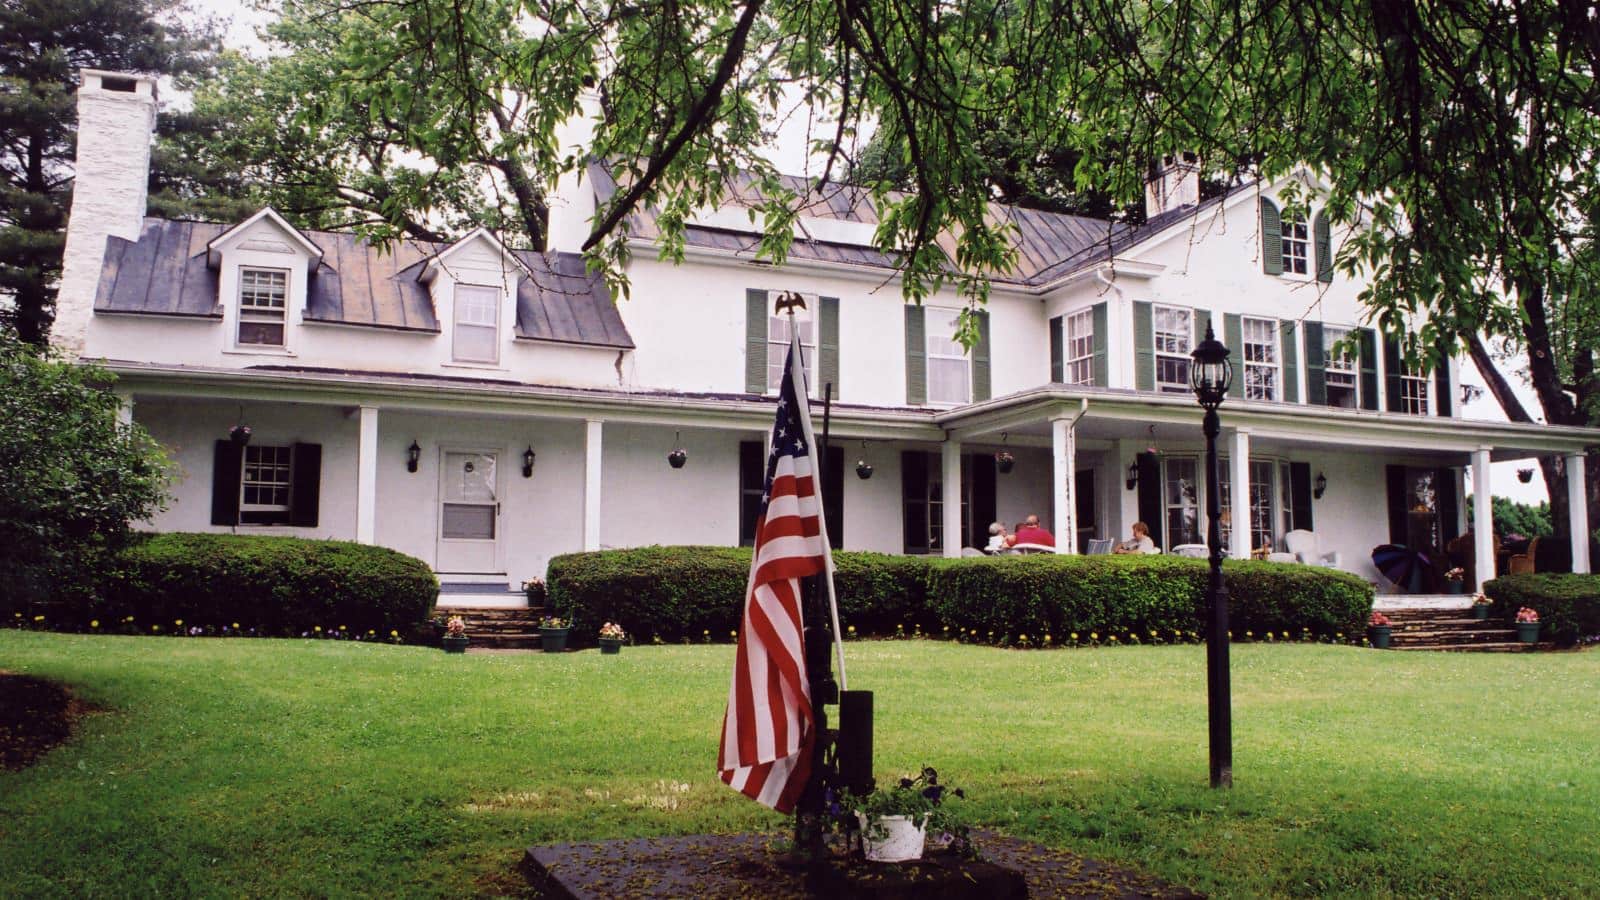 Exterior view of property painted white with dark green shutters surrounded by green grass, shrubs, and trees